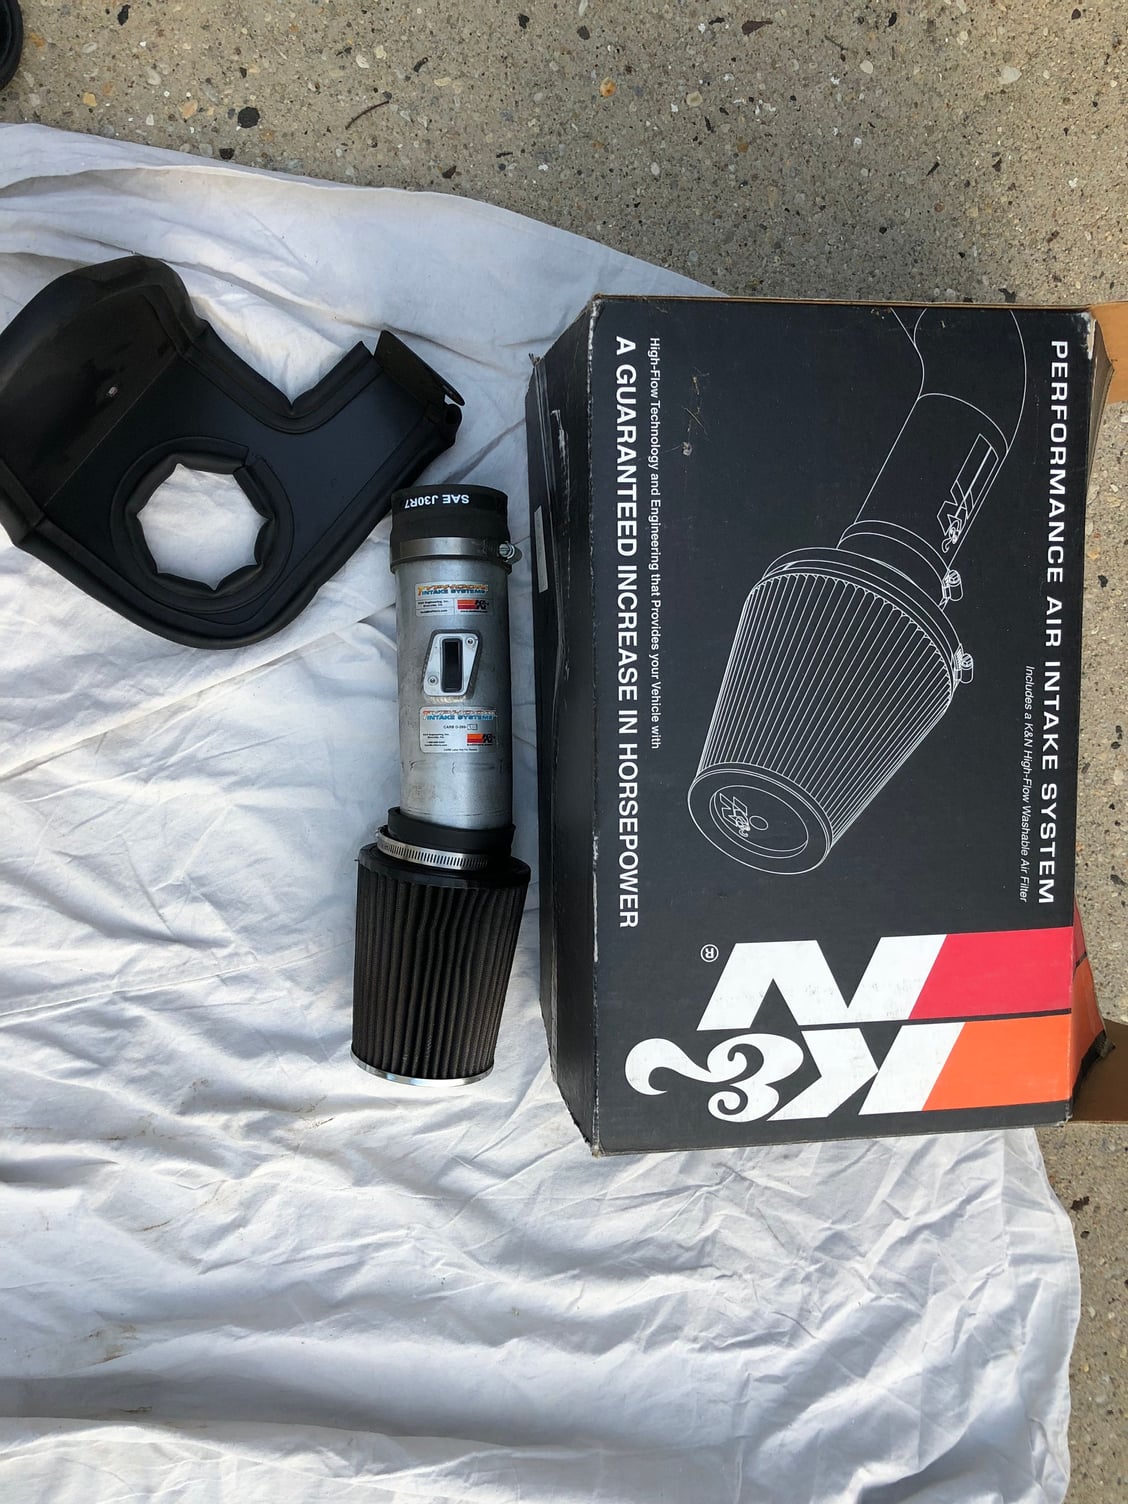 Miscellaneous - FS: (Tlx rsr coilovers and some other parts) Grill is only part left for sale - Used - 2015 to 2019 Acura TLX - Queens, NY 11420, United States